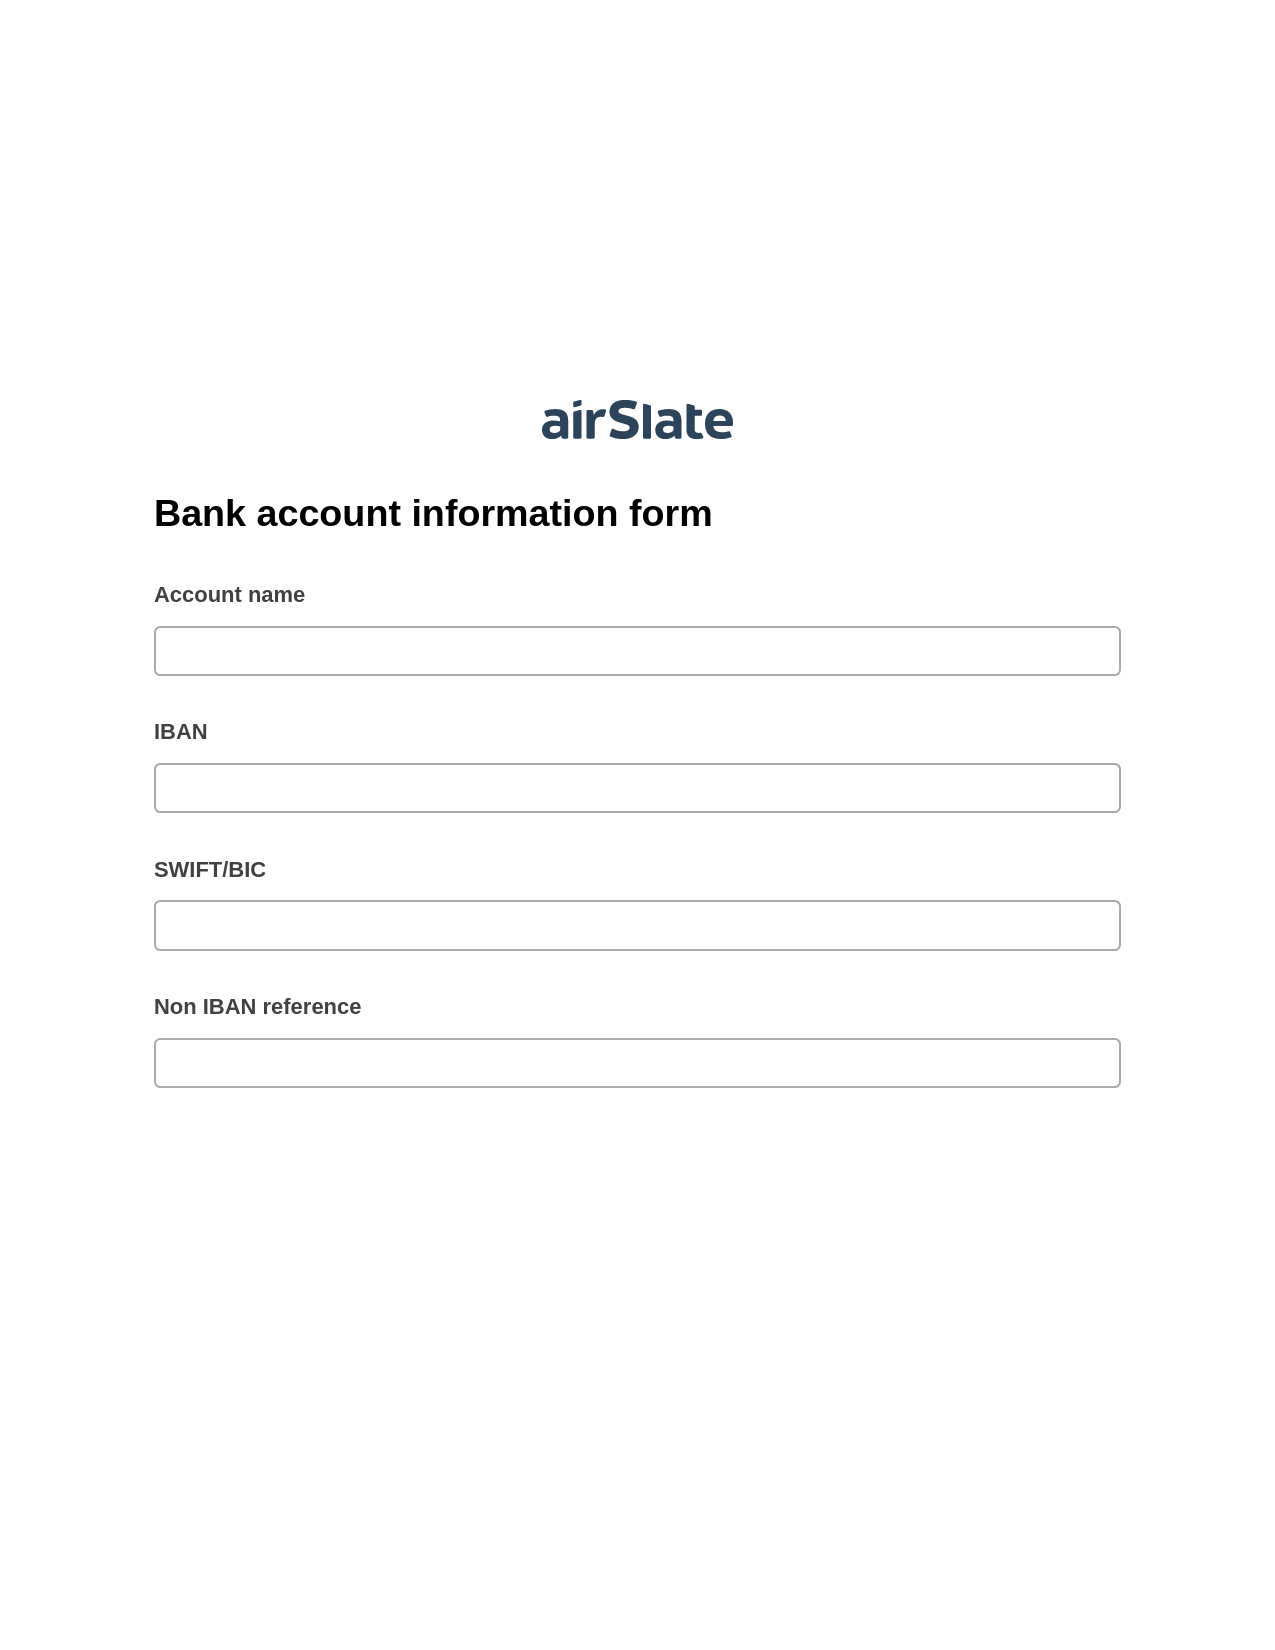 Bank account information form Pre-fill from MySQL Dropdown Options Bot, Roles Reminder Bot, Export to MySQL Bot